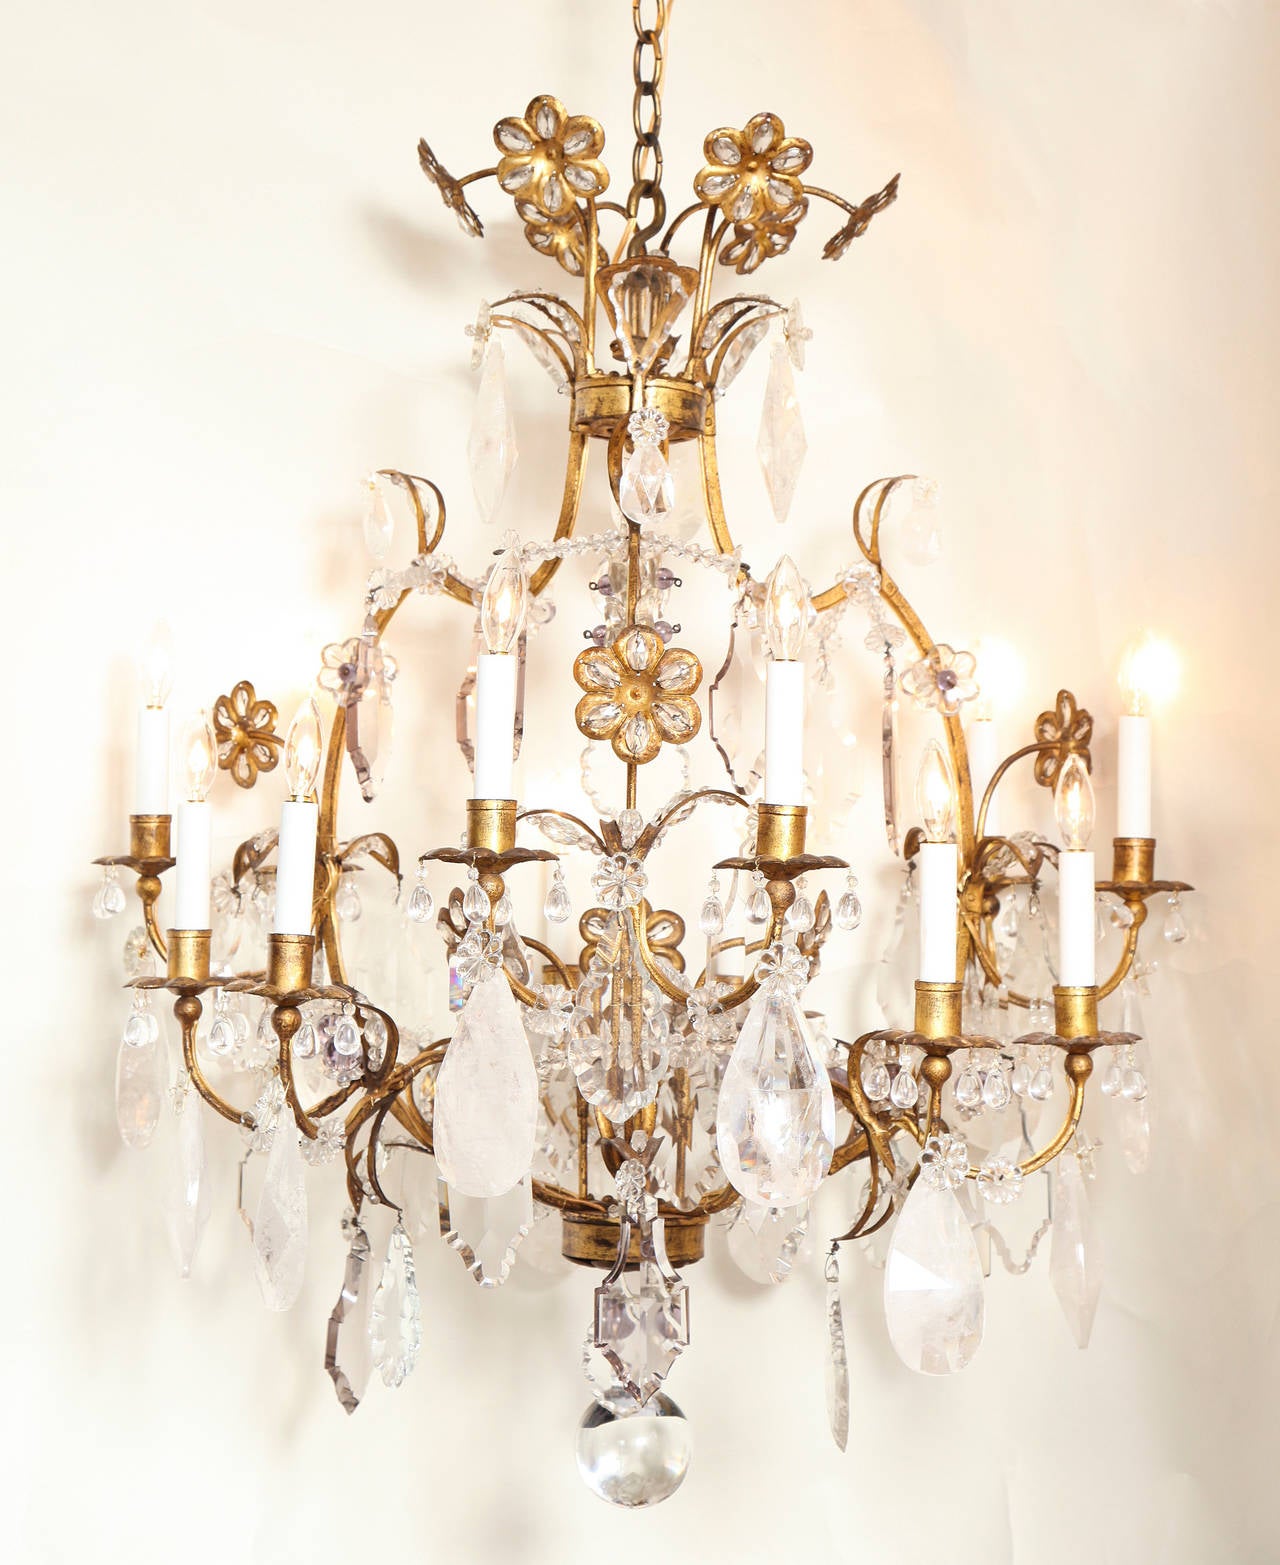 A twelve-light gilt iron cage form Louis XV style Baguès chandelier, the arms of staggered height issuing from frame draped with rock crystal and faceted crystal drops. The center with stems of flowers with inset crystal beaded petals. The frame